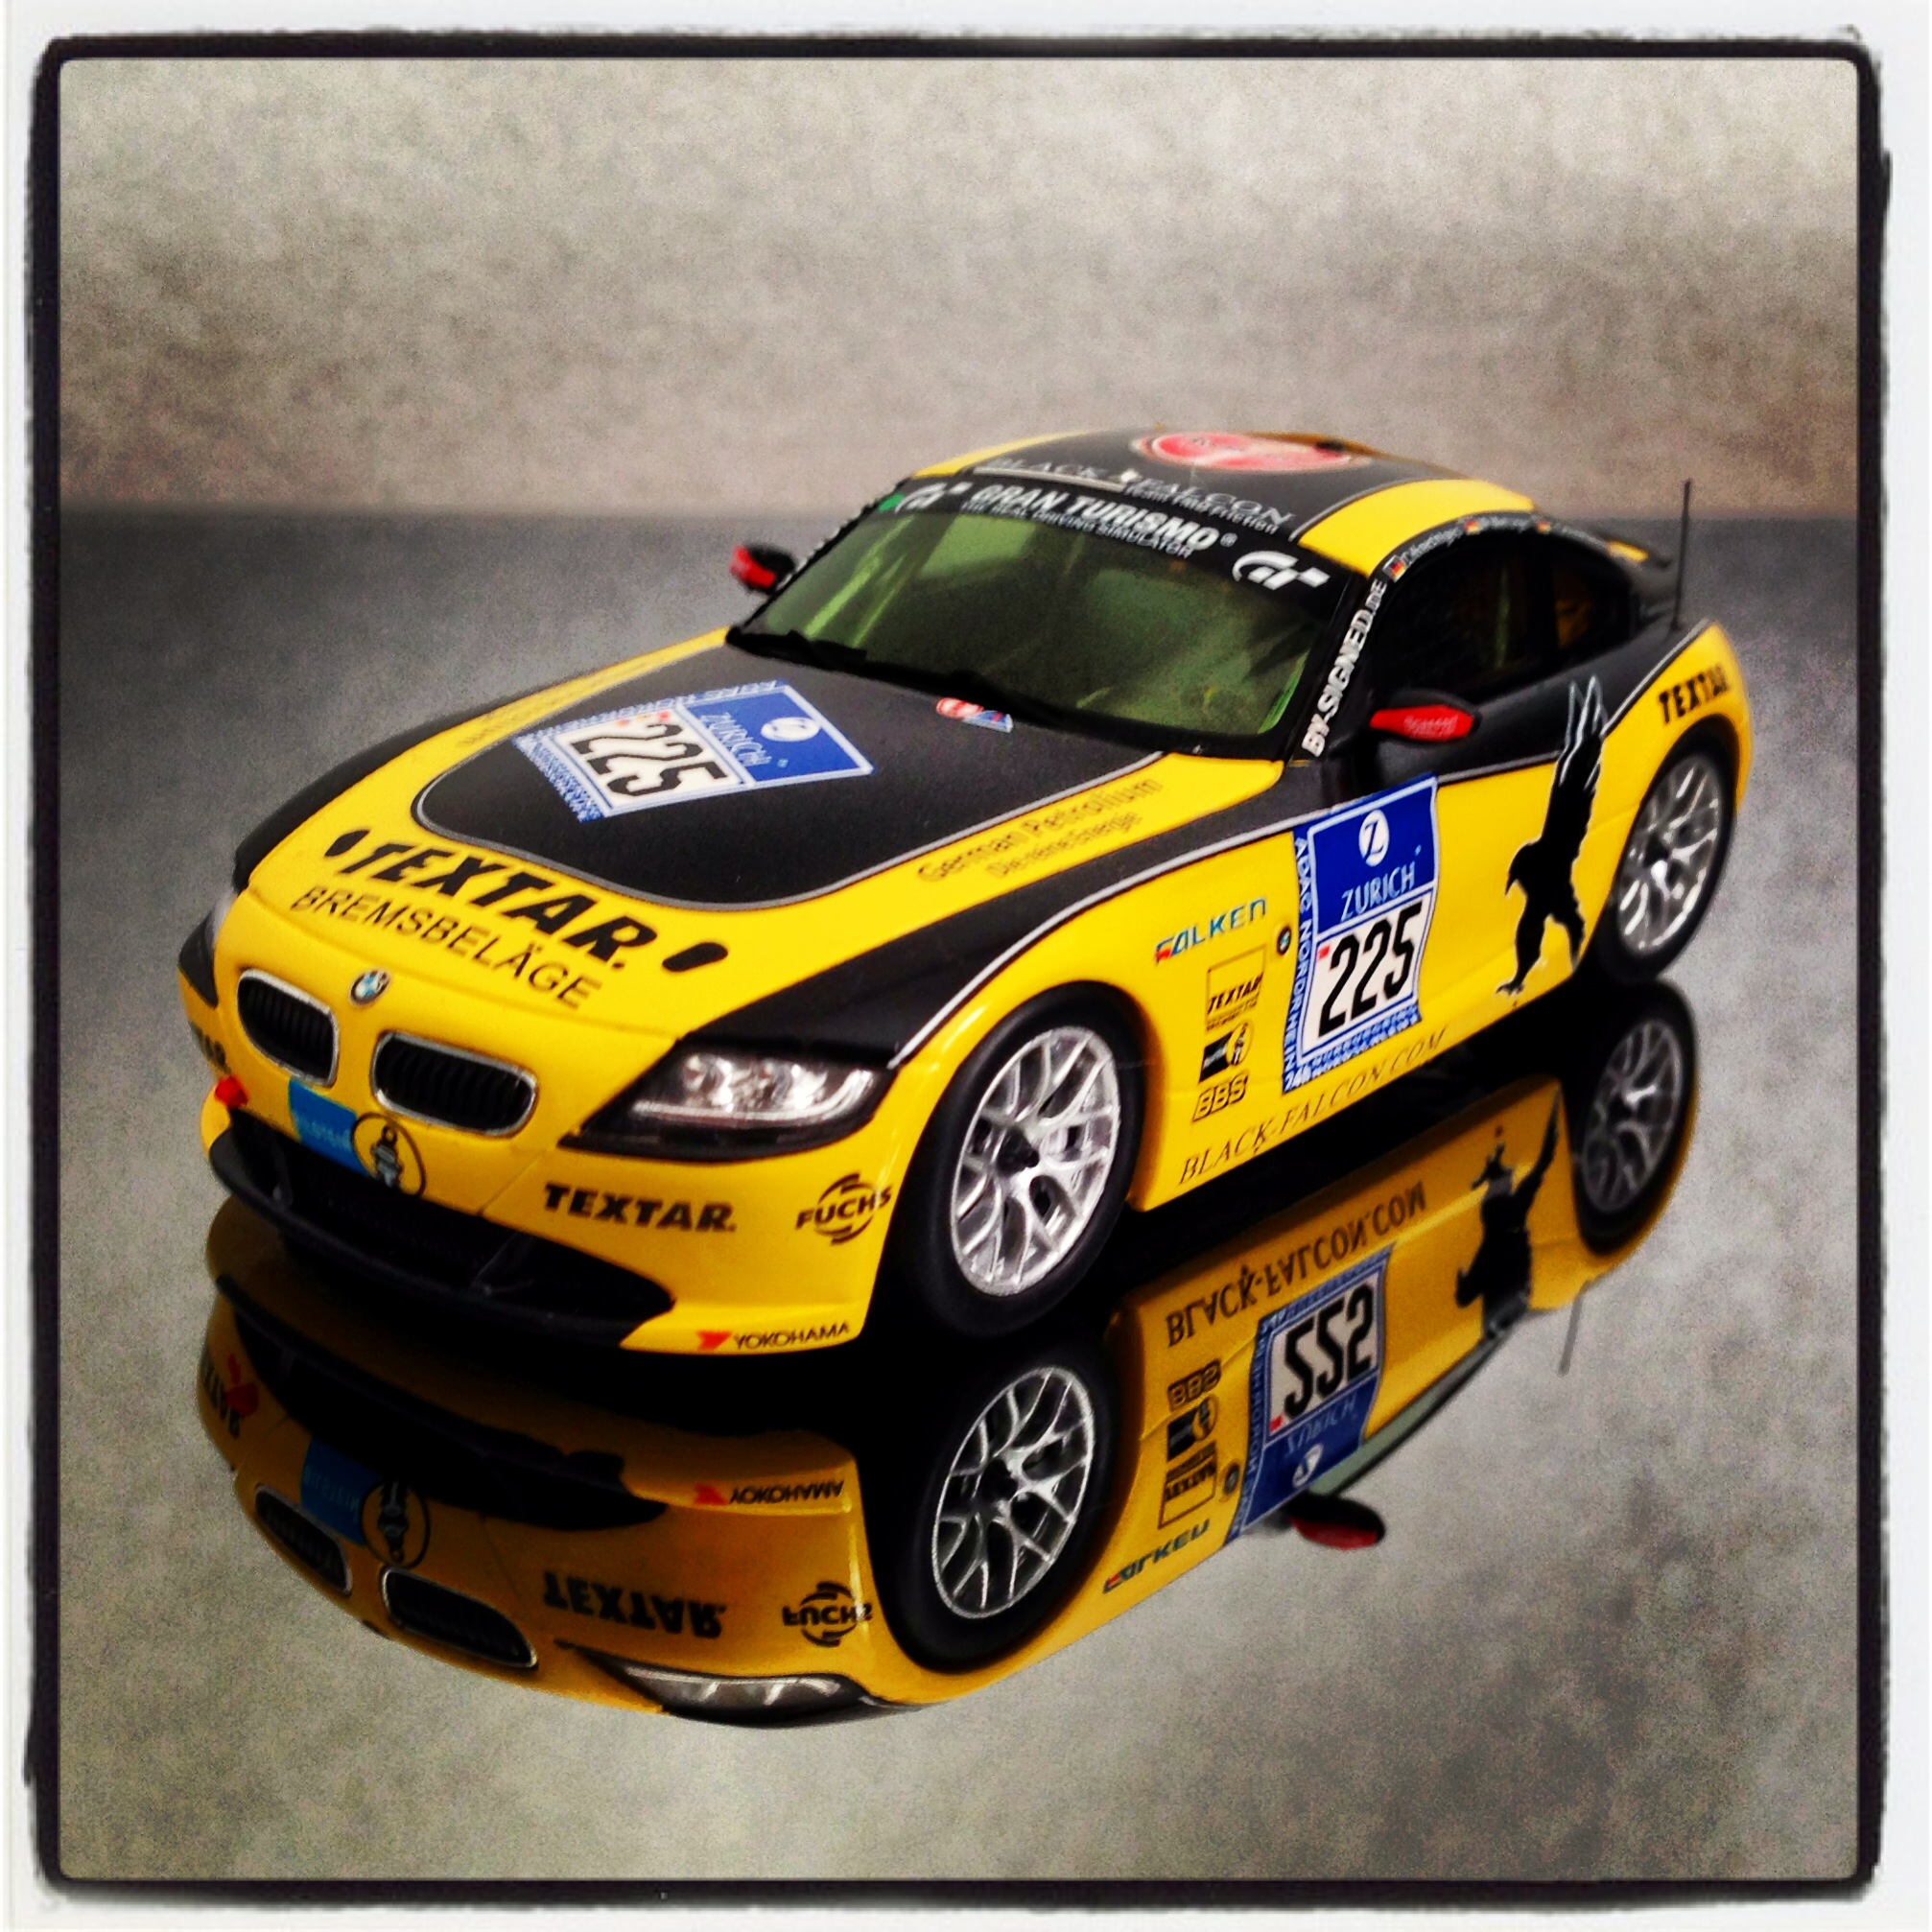 BMW Z4 (E85) Black Falcon team TMD Friction, 24h ADAC Nurburgring 2011, #225 Knechtges/Metzger/Scheerbarth/Leisen, le 1 of 1,010pcs. (minichamps)